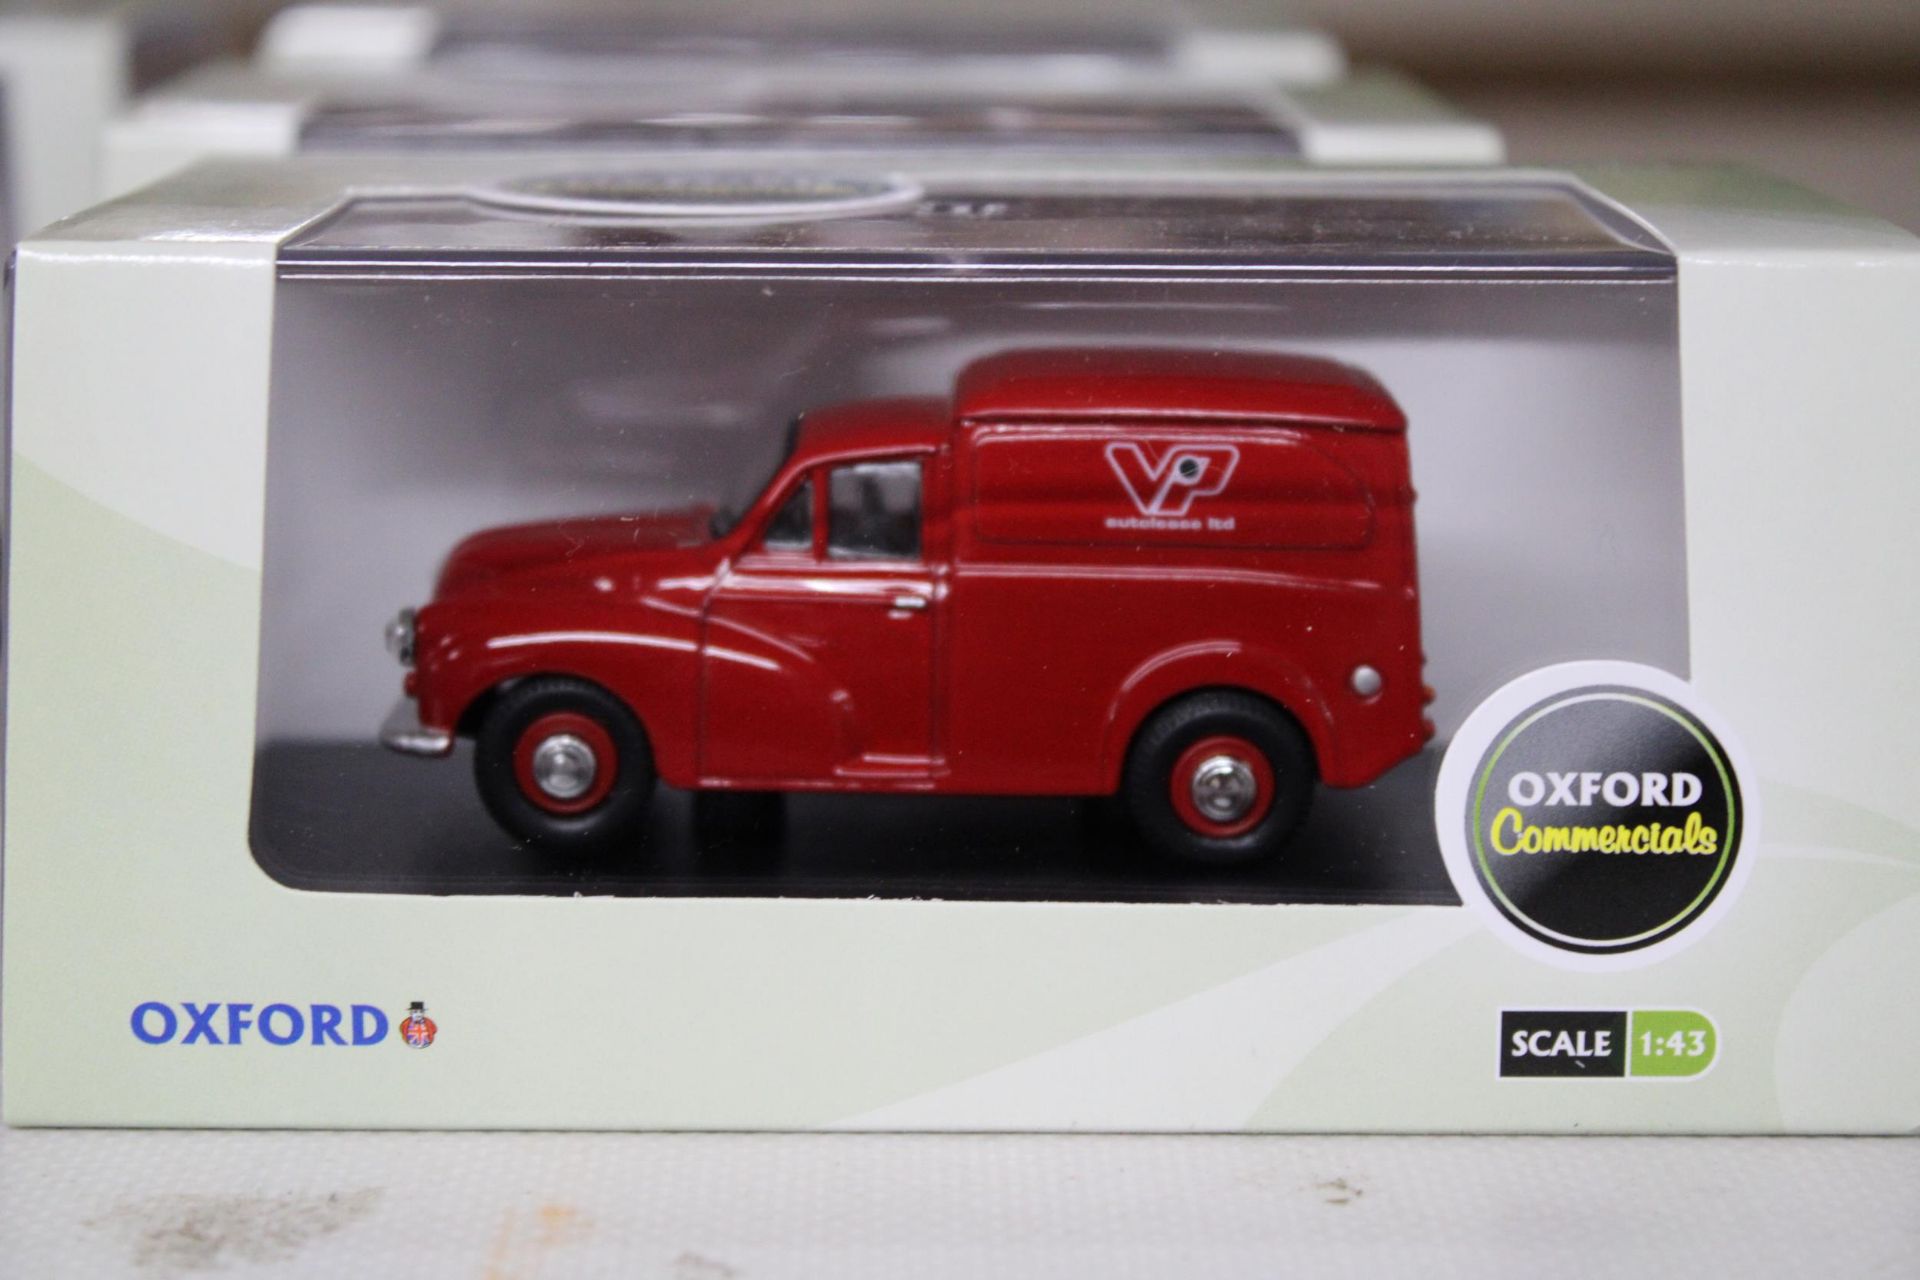 SIX OXFORD COMMERCIALS, VANS - AS NEW IN BOXES - Image 2 of 4